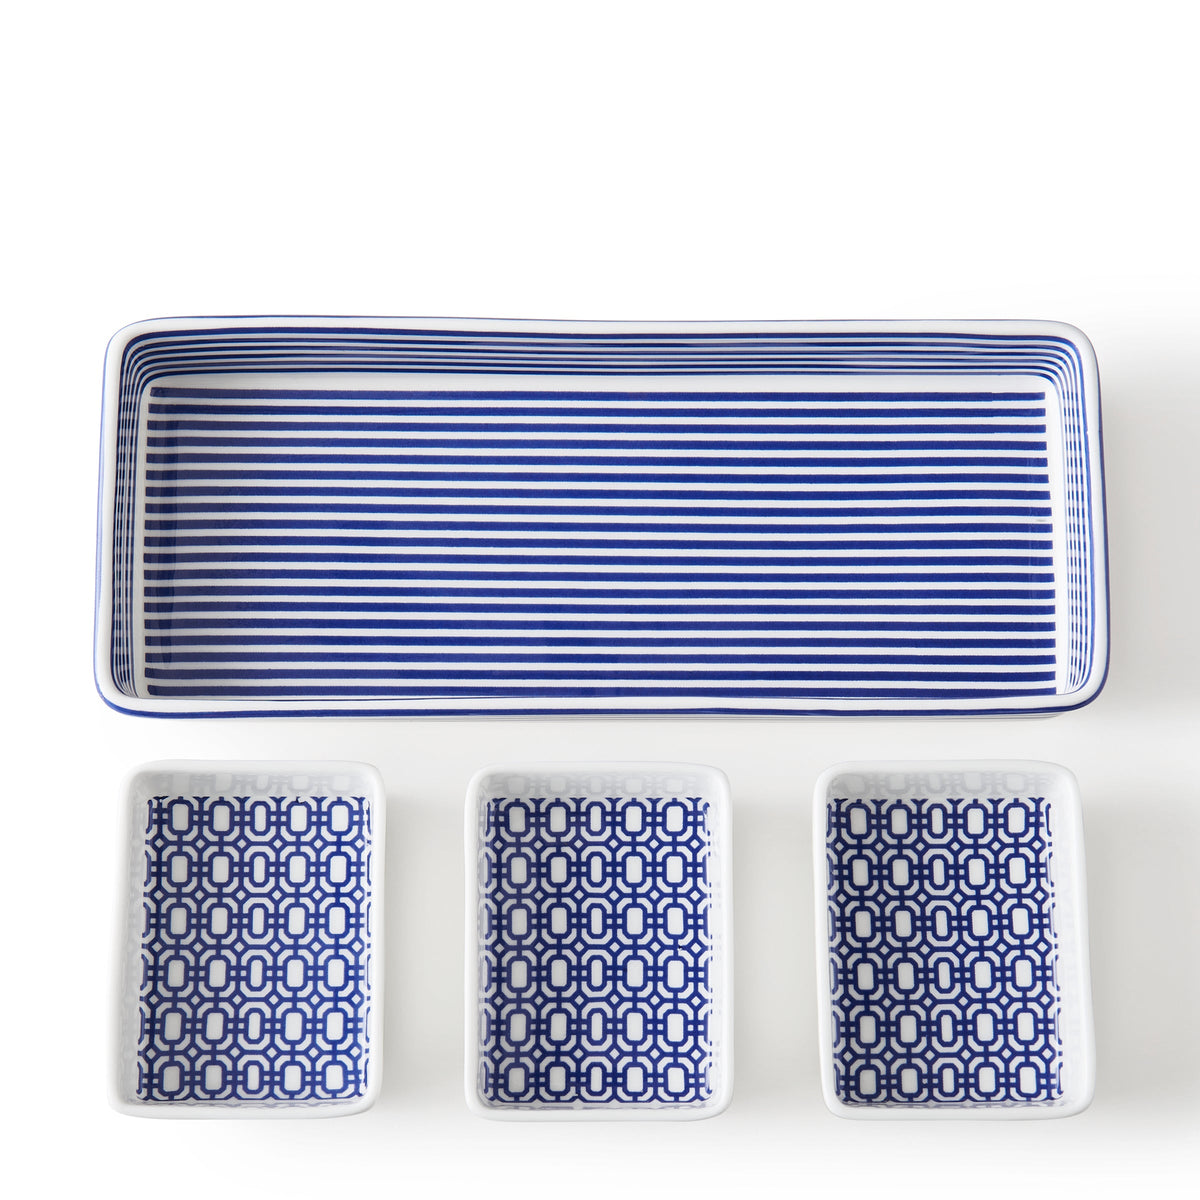 A Newport Nested Appetizer Tray &amp; Spoons Set by Caskata with three bone china blue and white dishes.